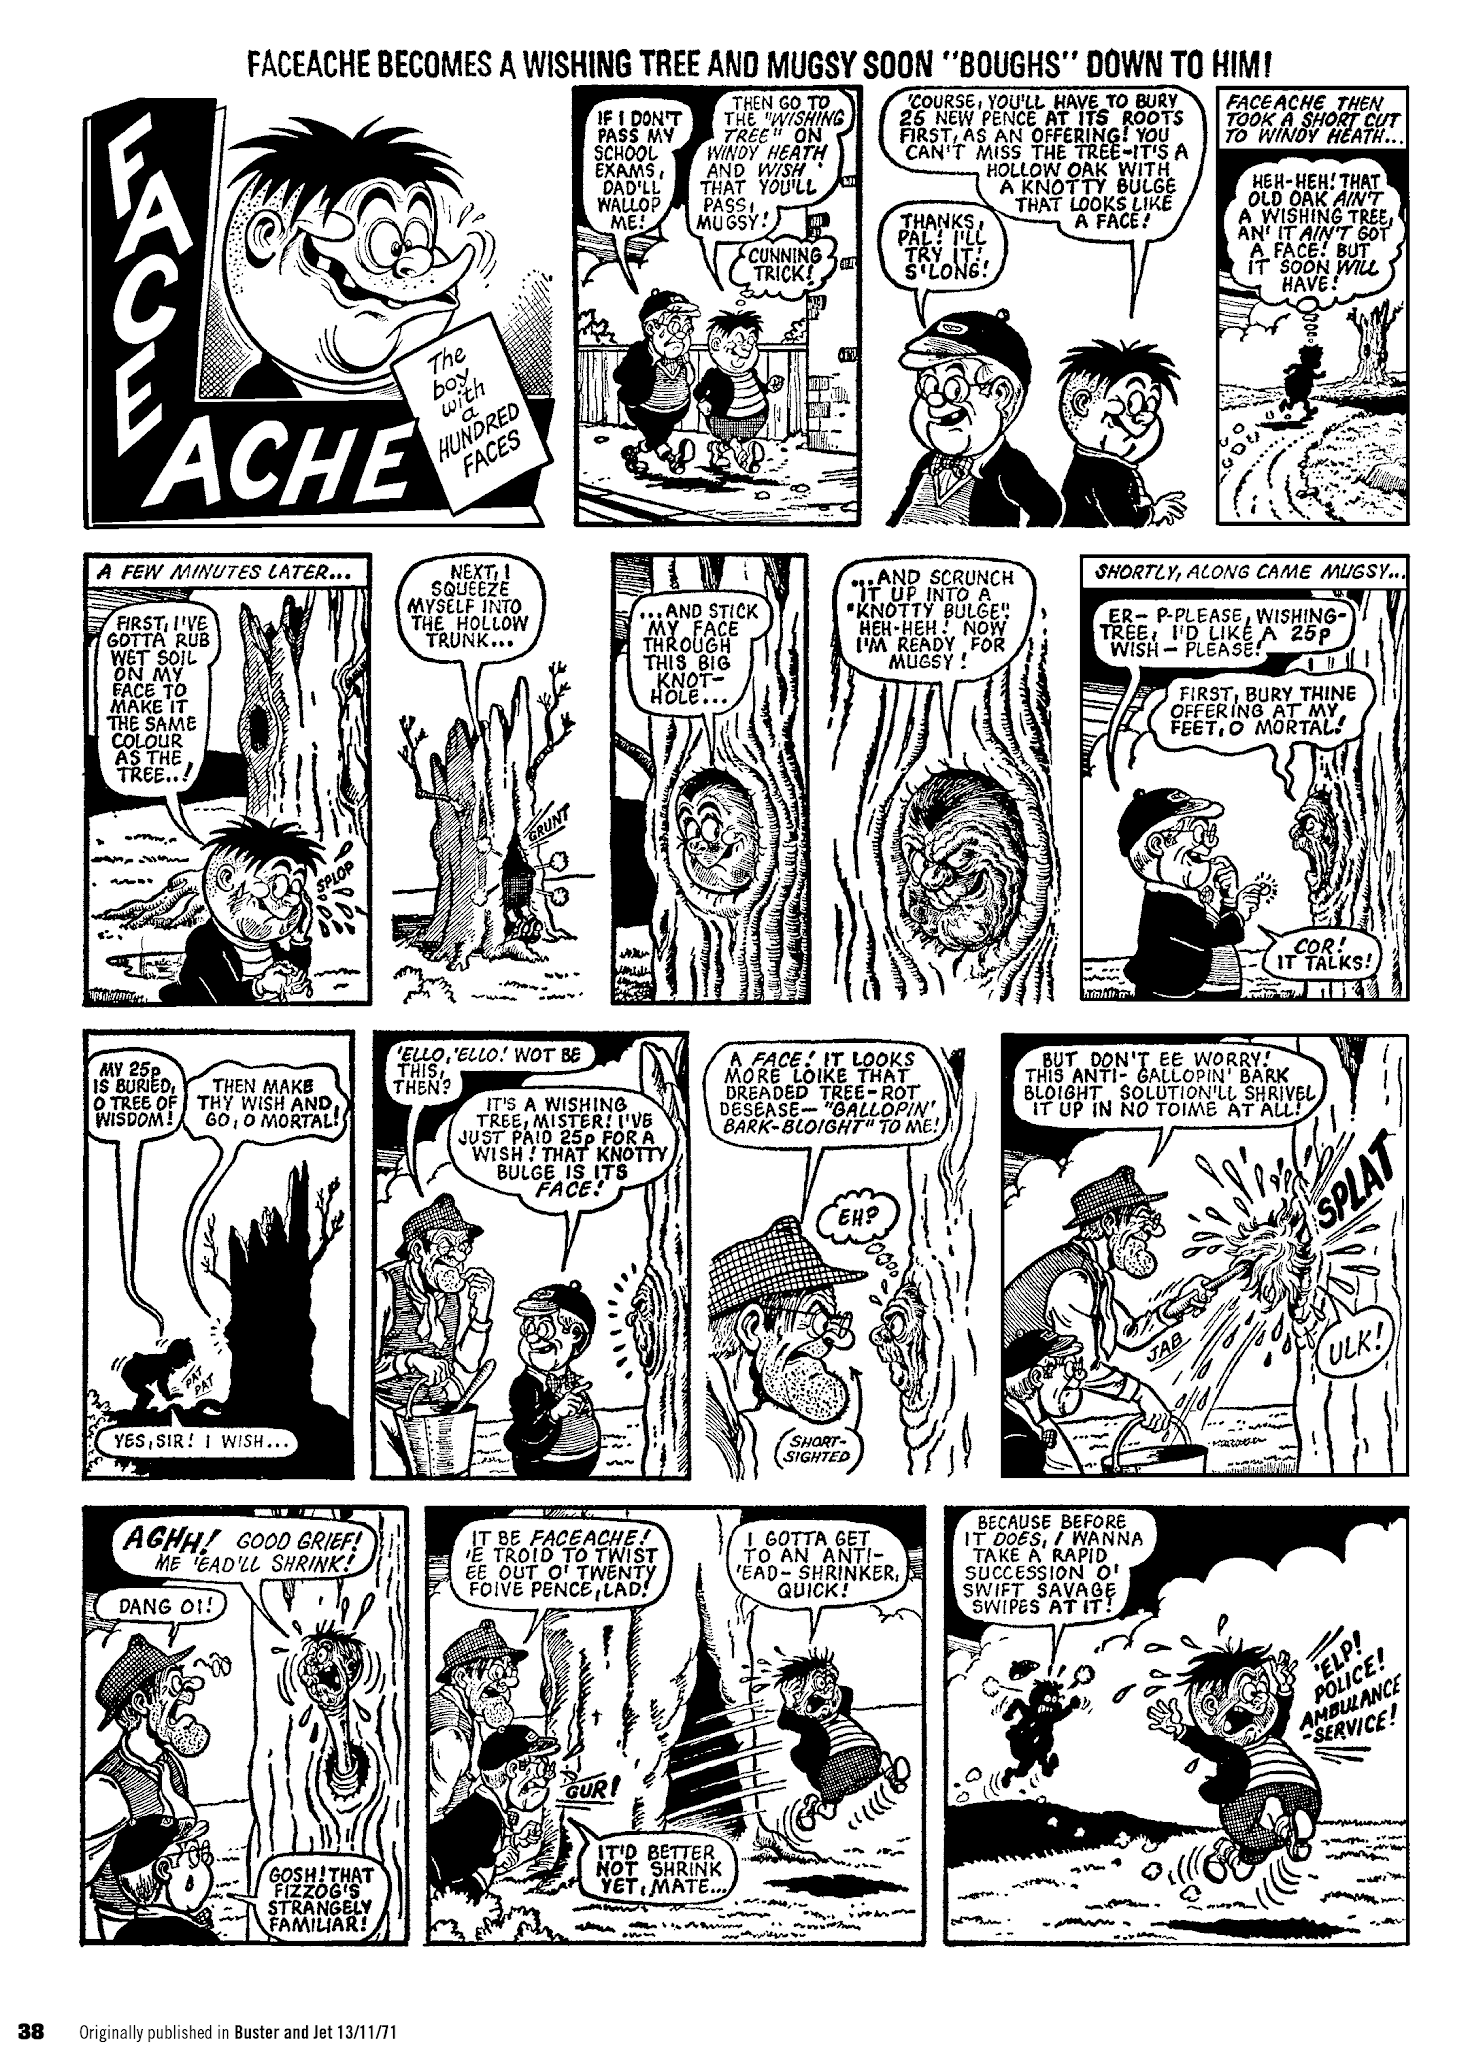 Read online Faceache: The First Hundred Scrunges comic -  Issue # TPB 1 - 40